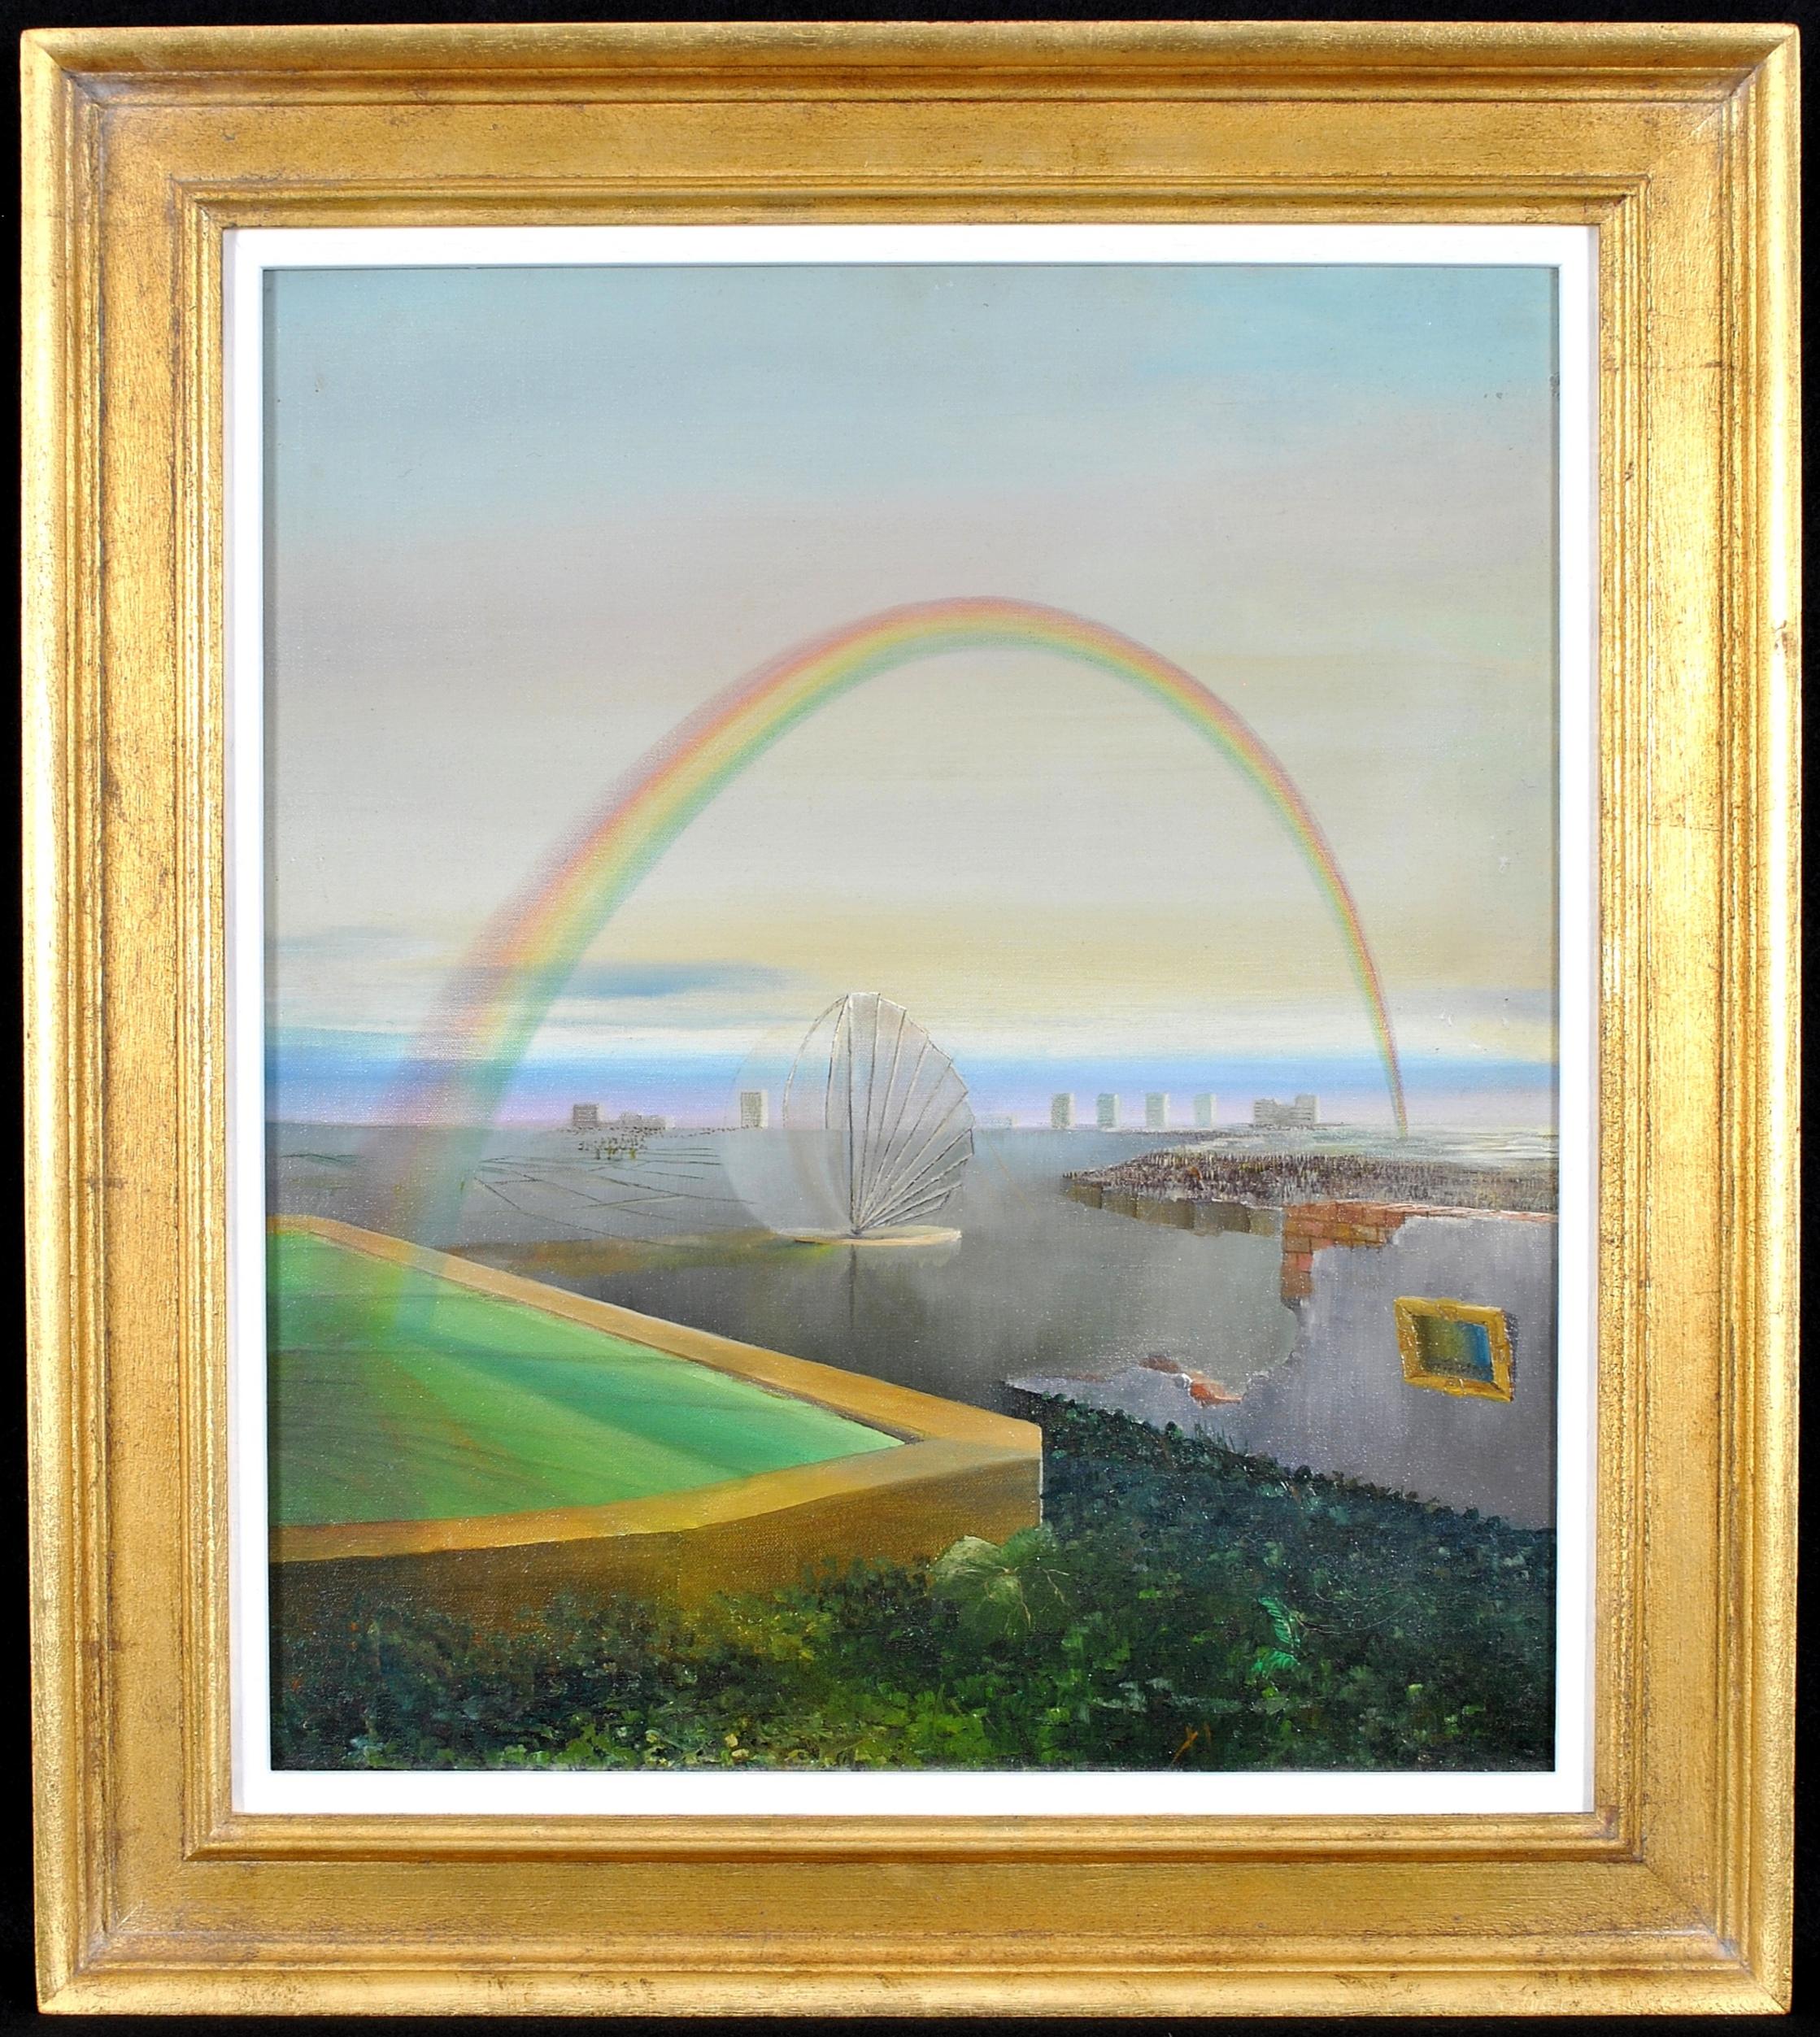 Surreal Landscape - Mid 20th Century English Surrealist Oil on Canvas Painting For Sale 2